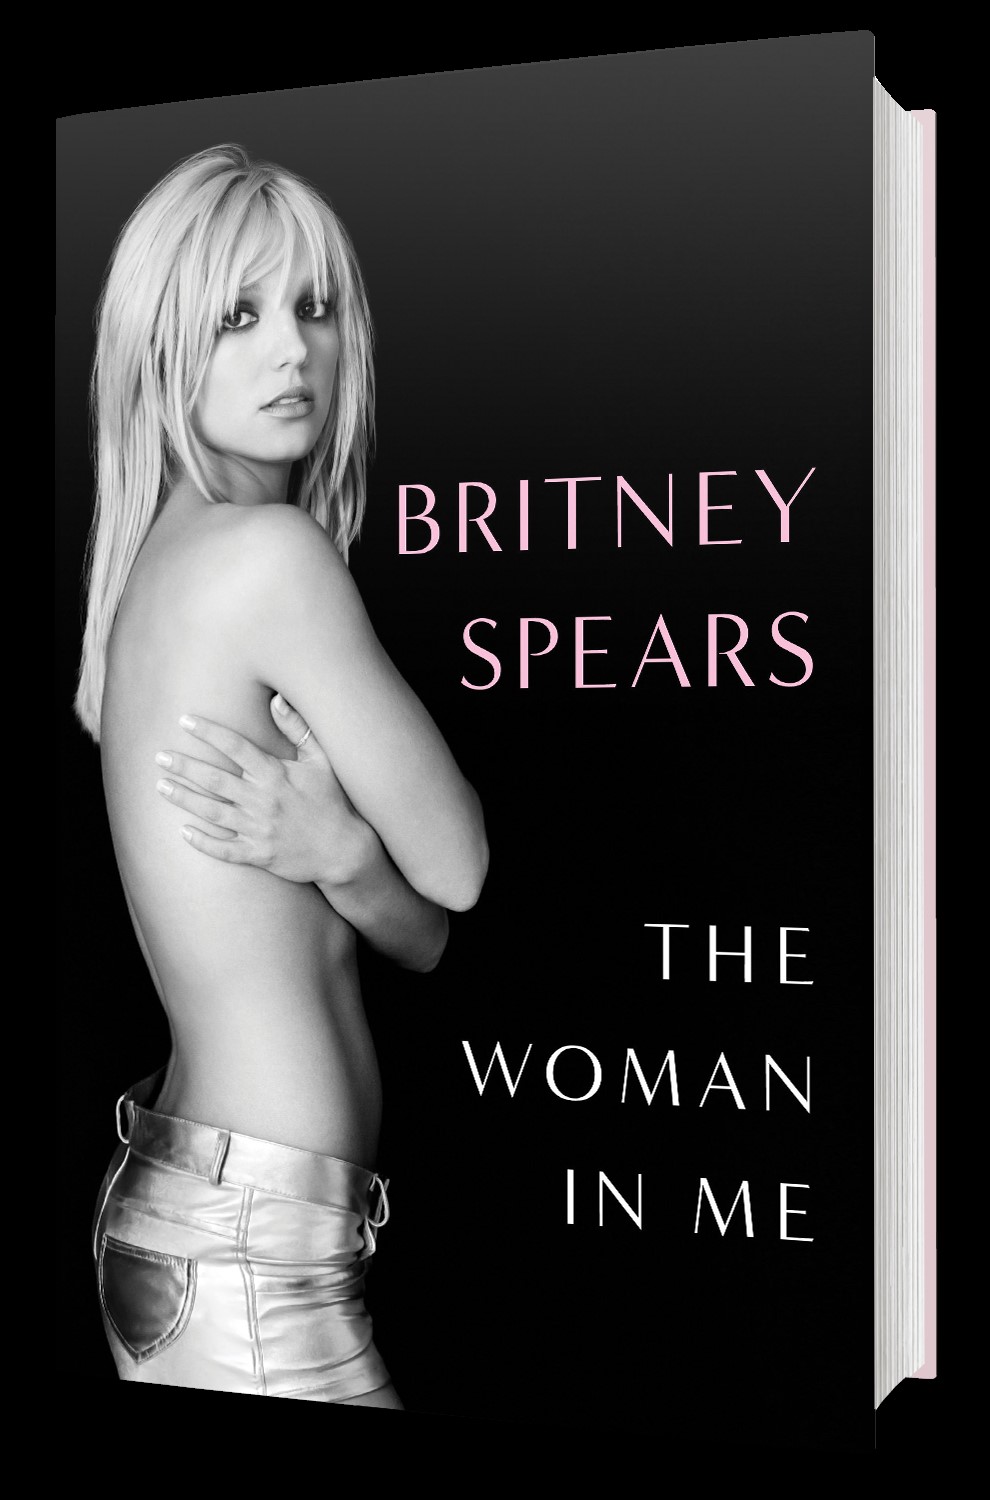 Book Review: Britney Spears` “The Woman In Me”